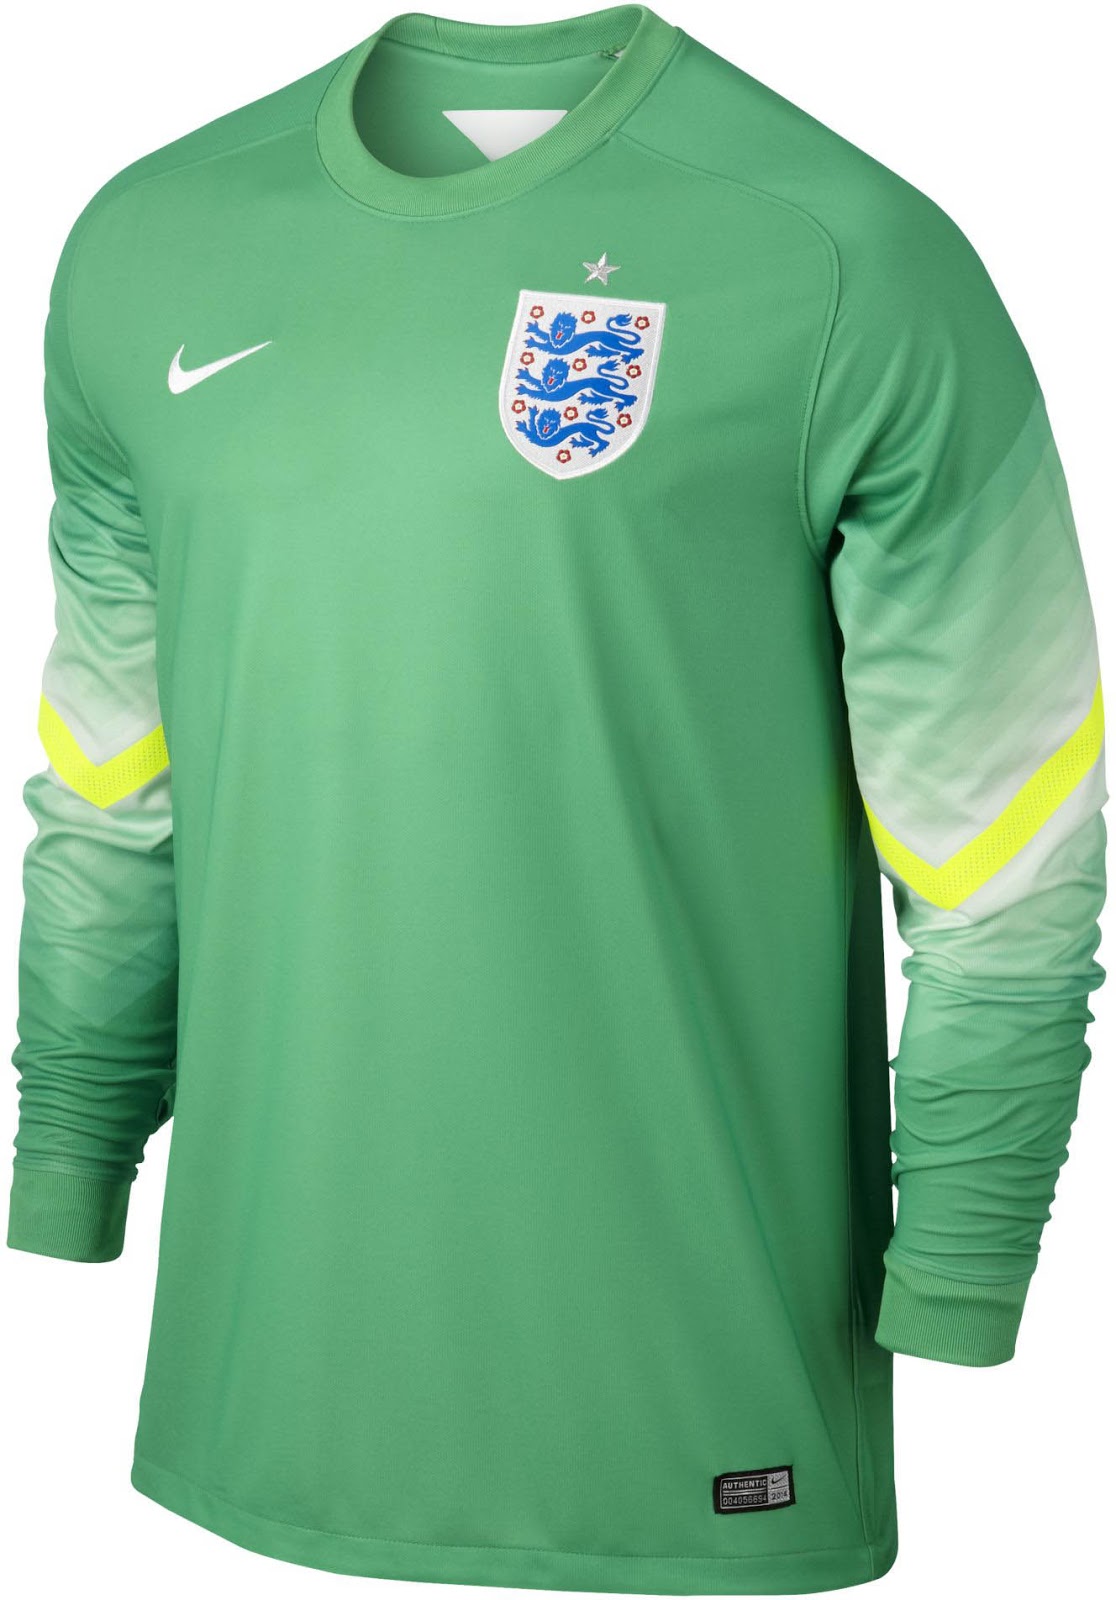 Nike England 2014 World Cup Home and Away Kits Released! - Footy Headlines